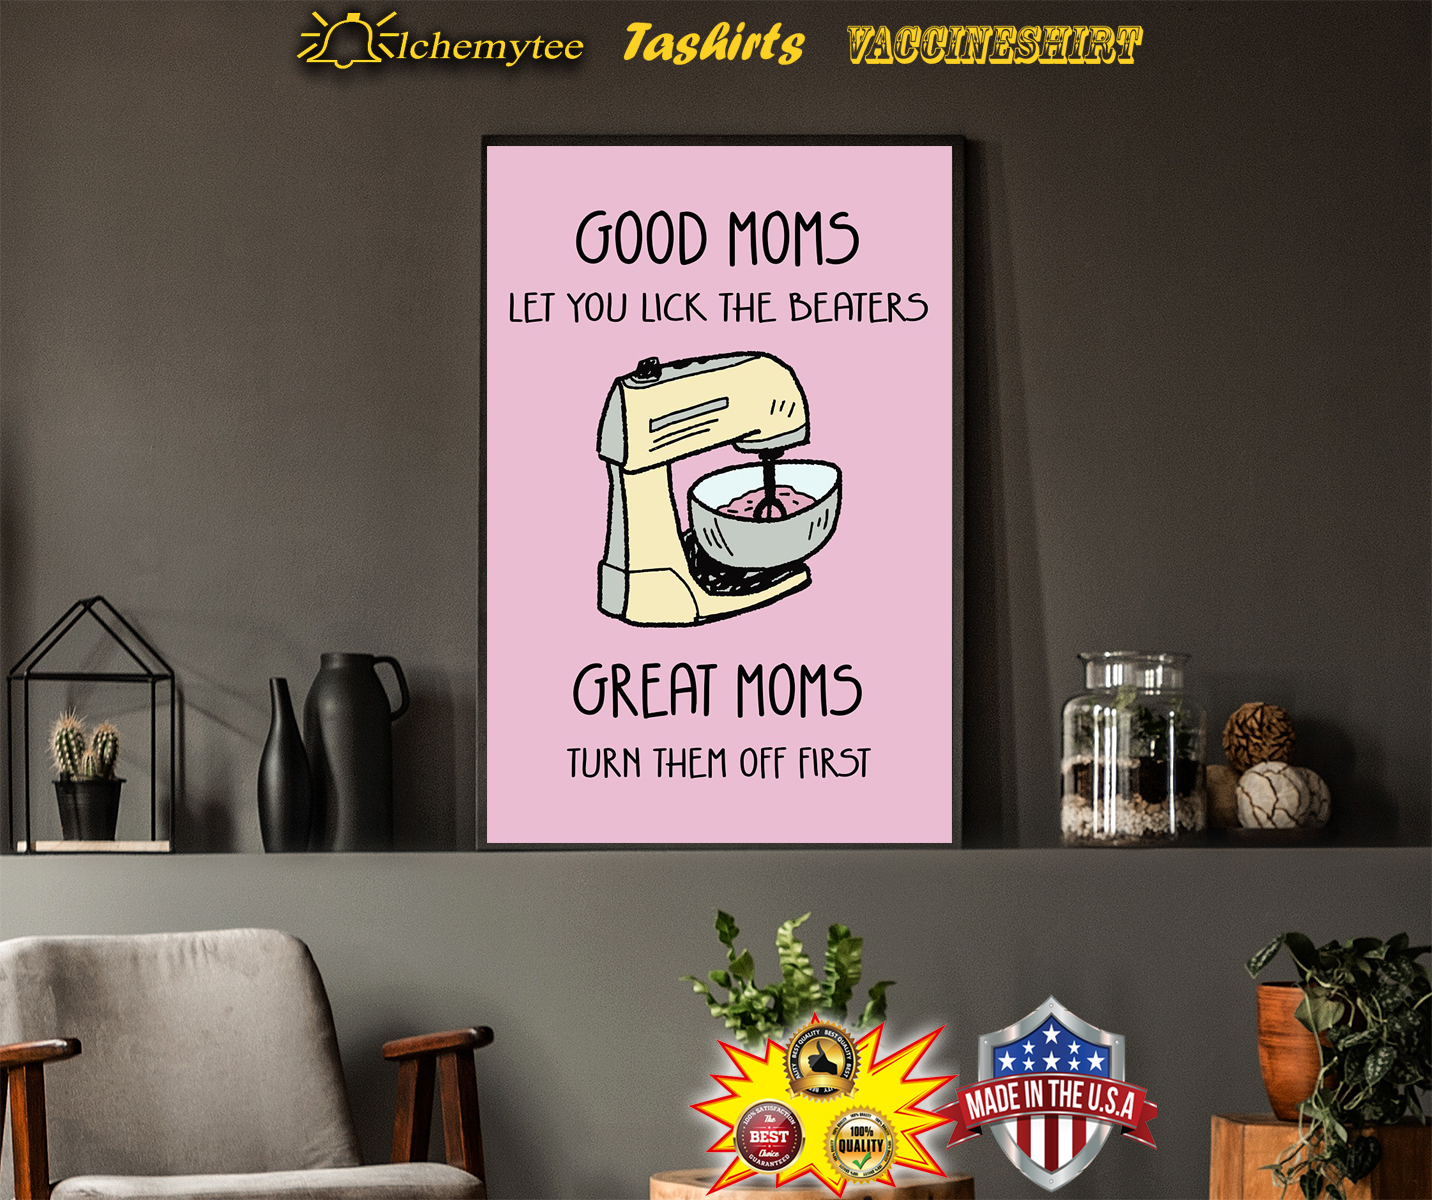 Food mixer Good moms let you lick the beaters poster